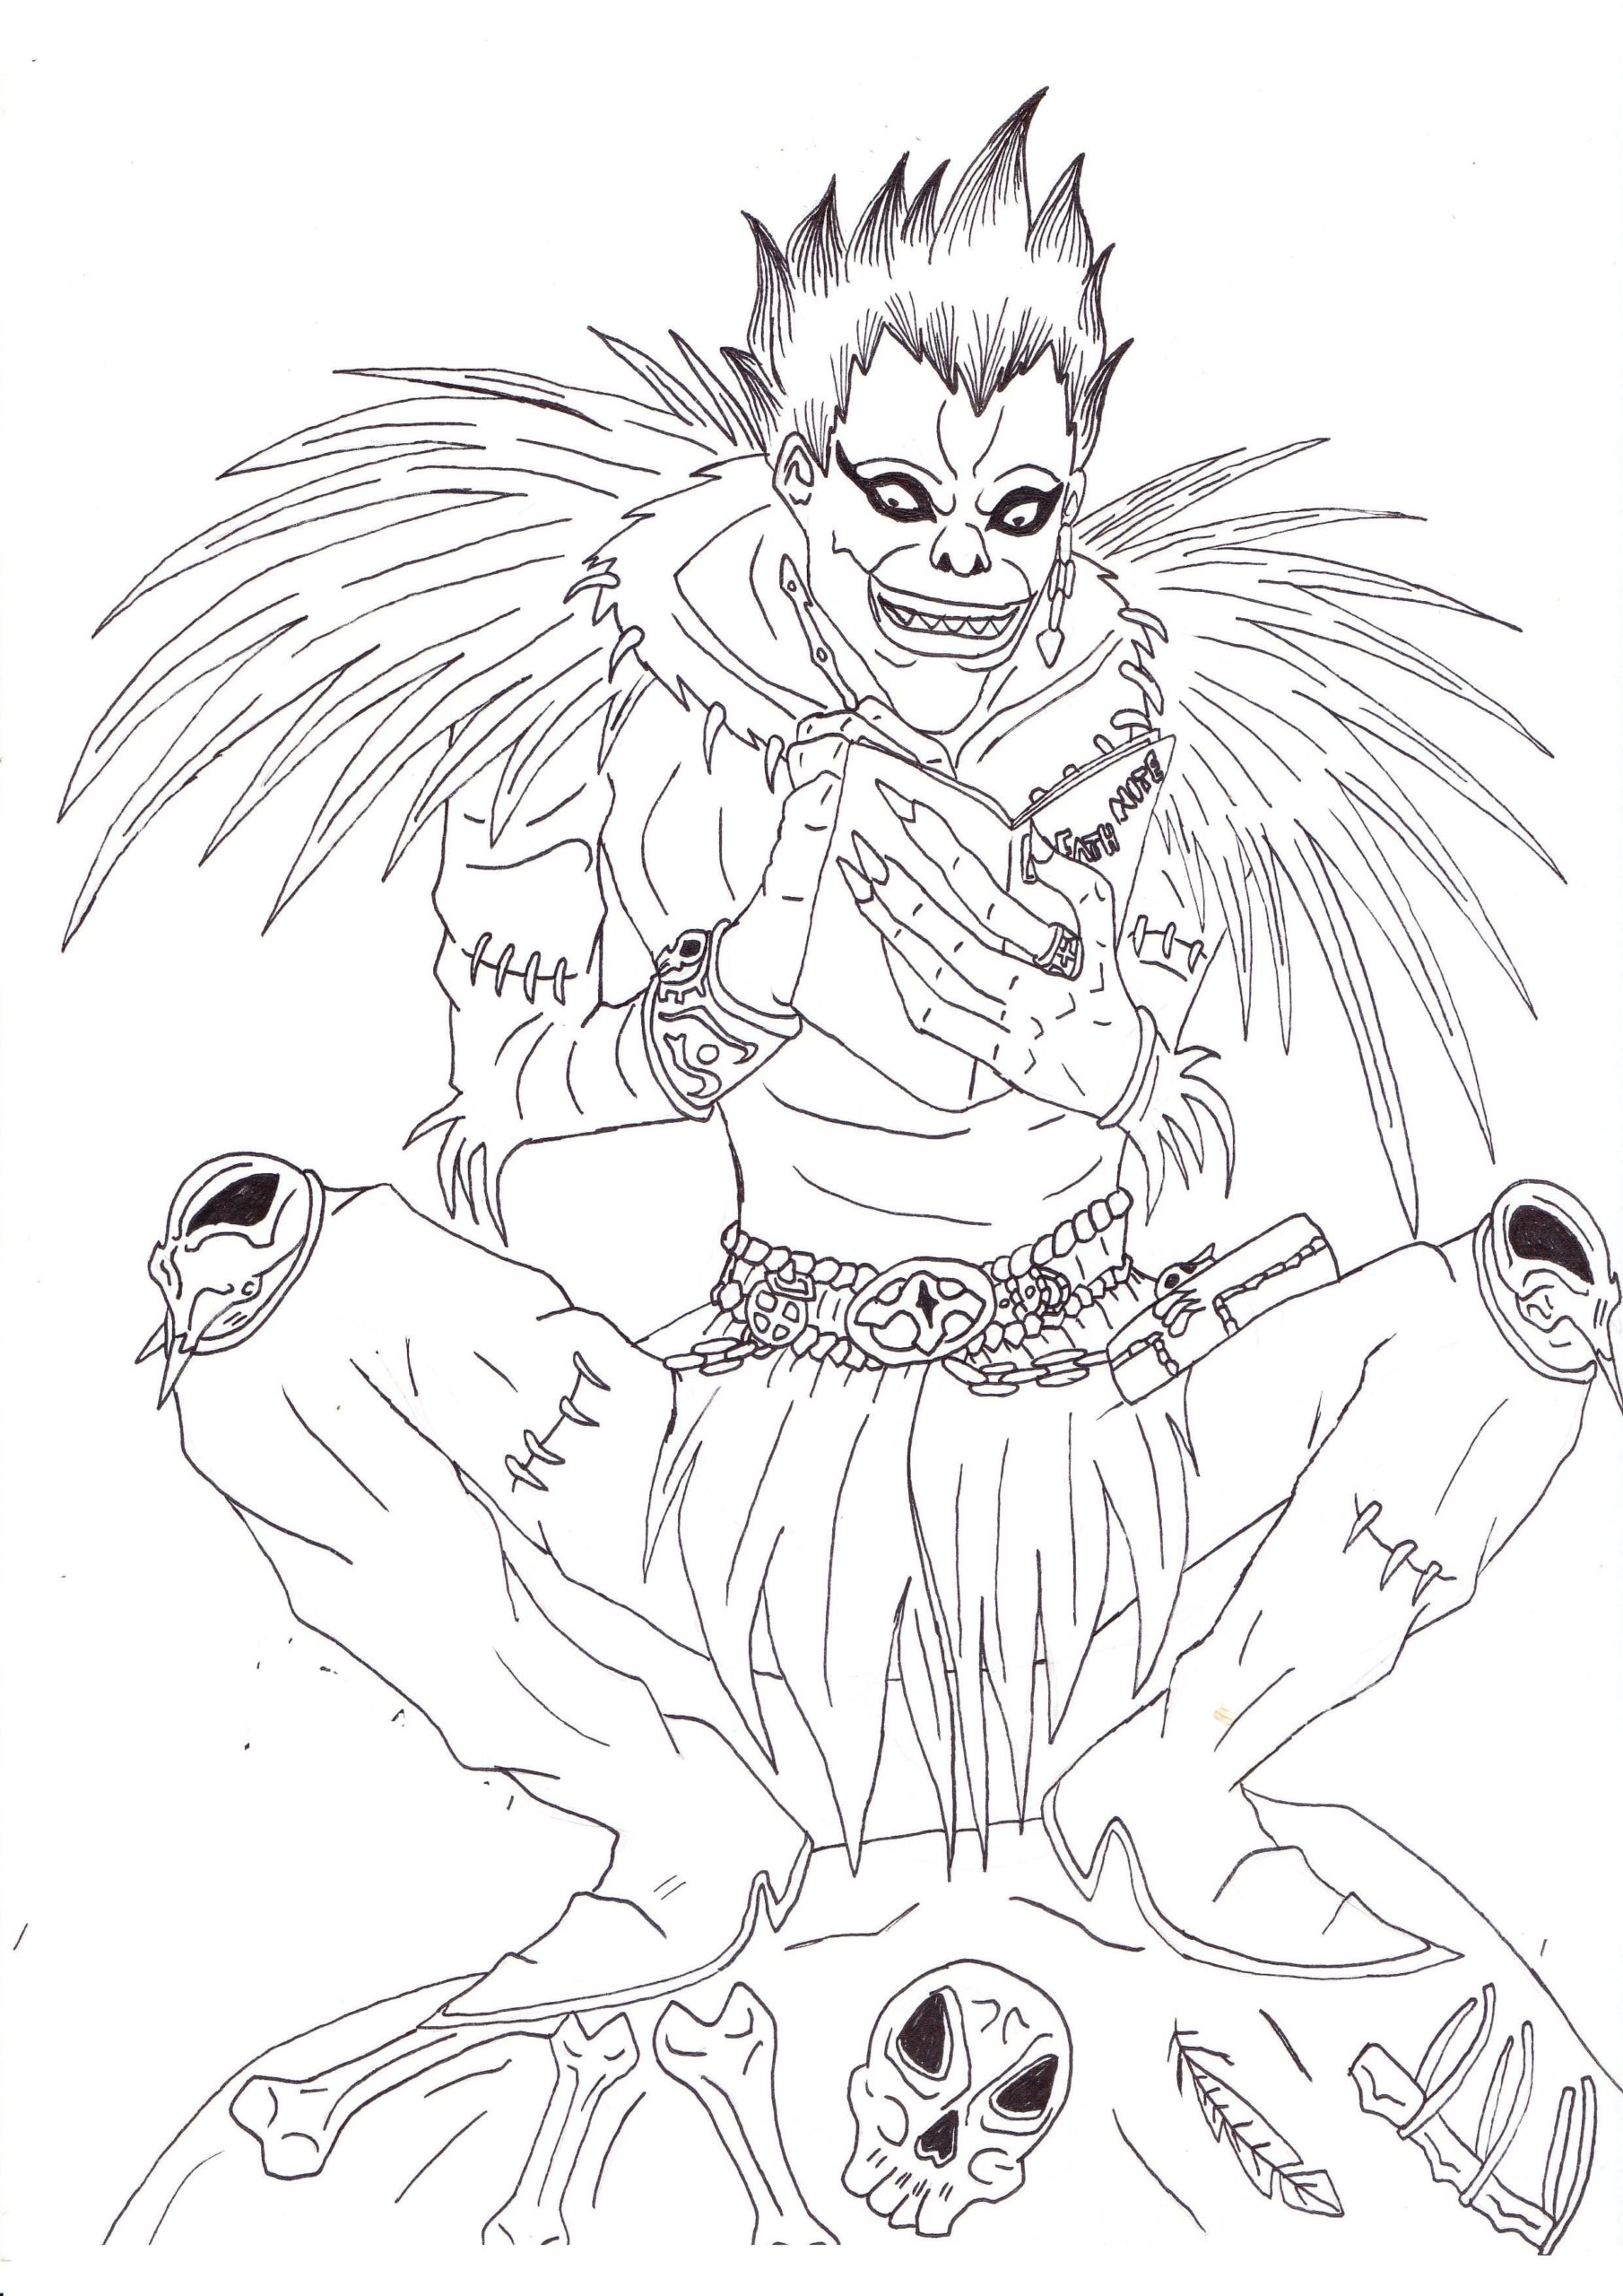 Coloring page Death Note Ryuk - the God of Death